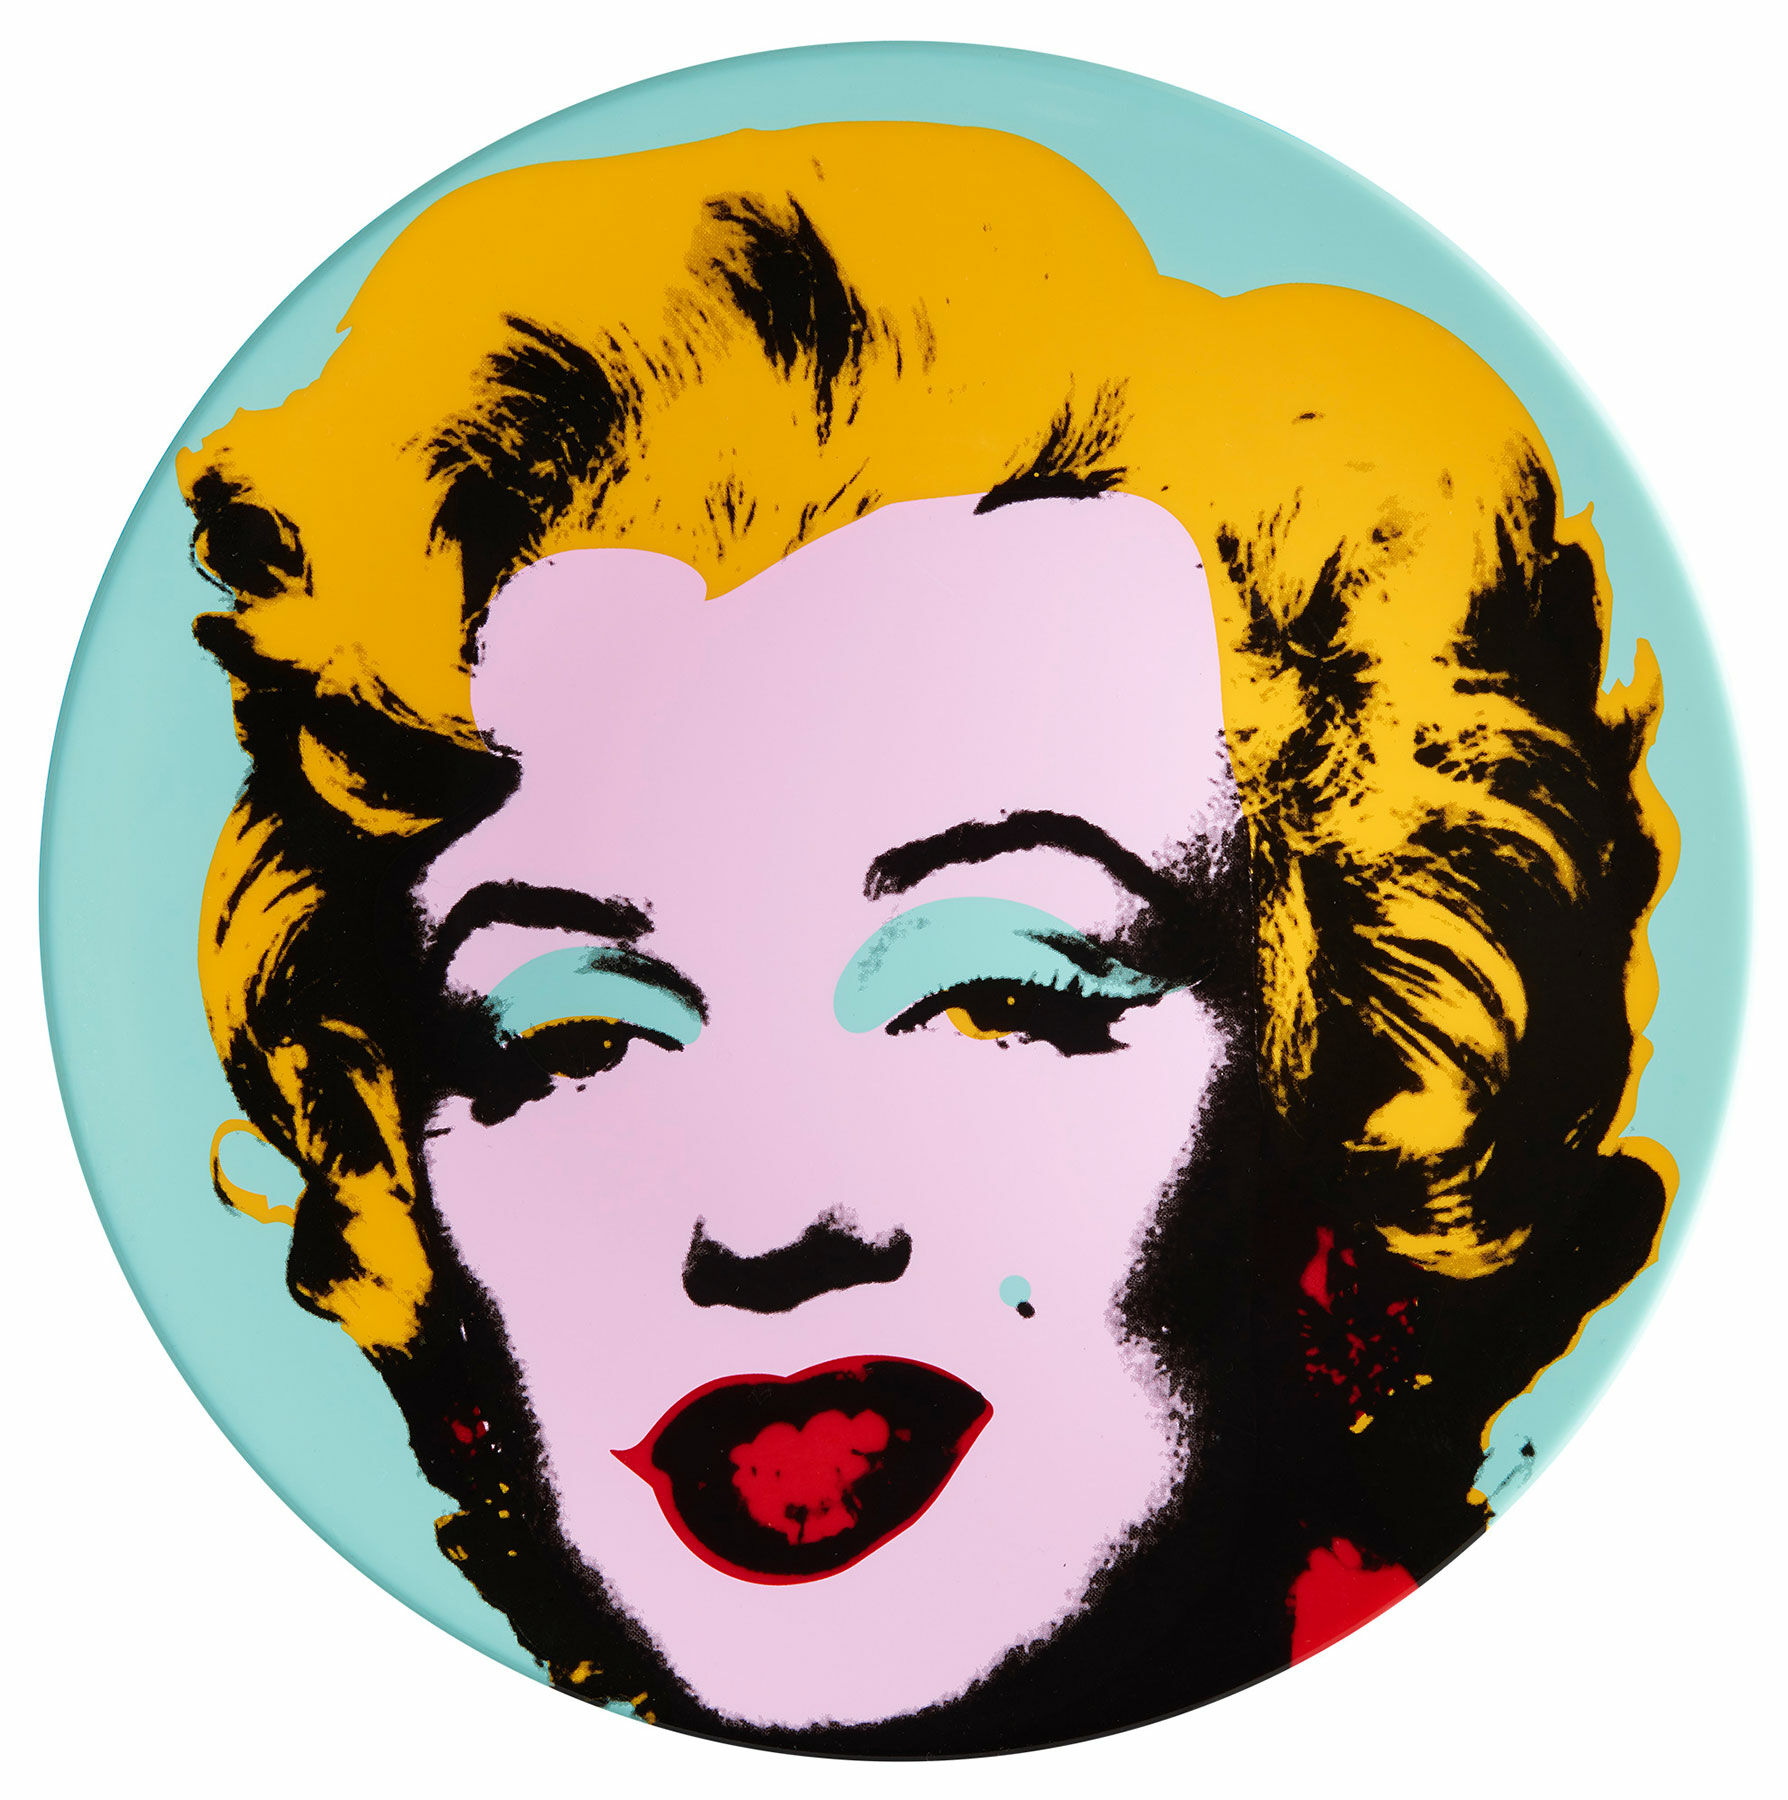 Porcelain plate "Marilyn" (blue) by Andy Warhol